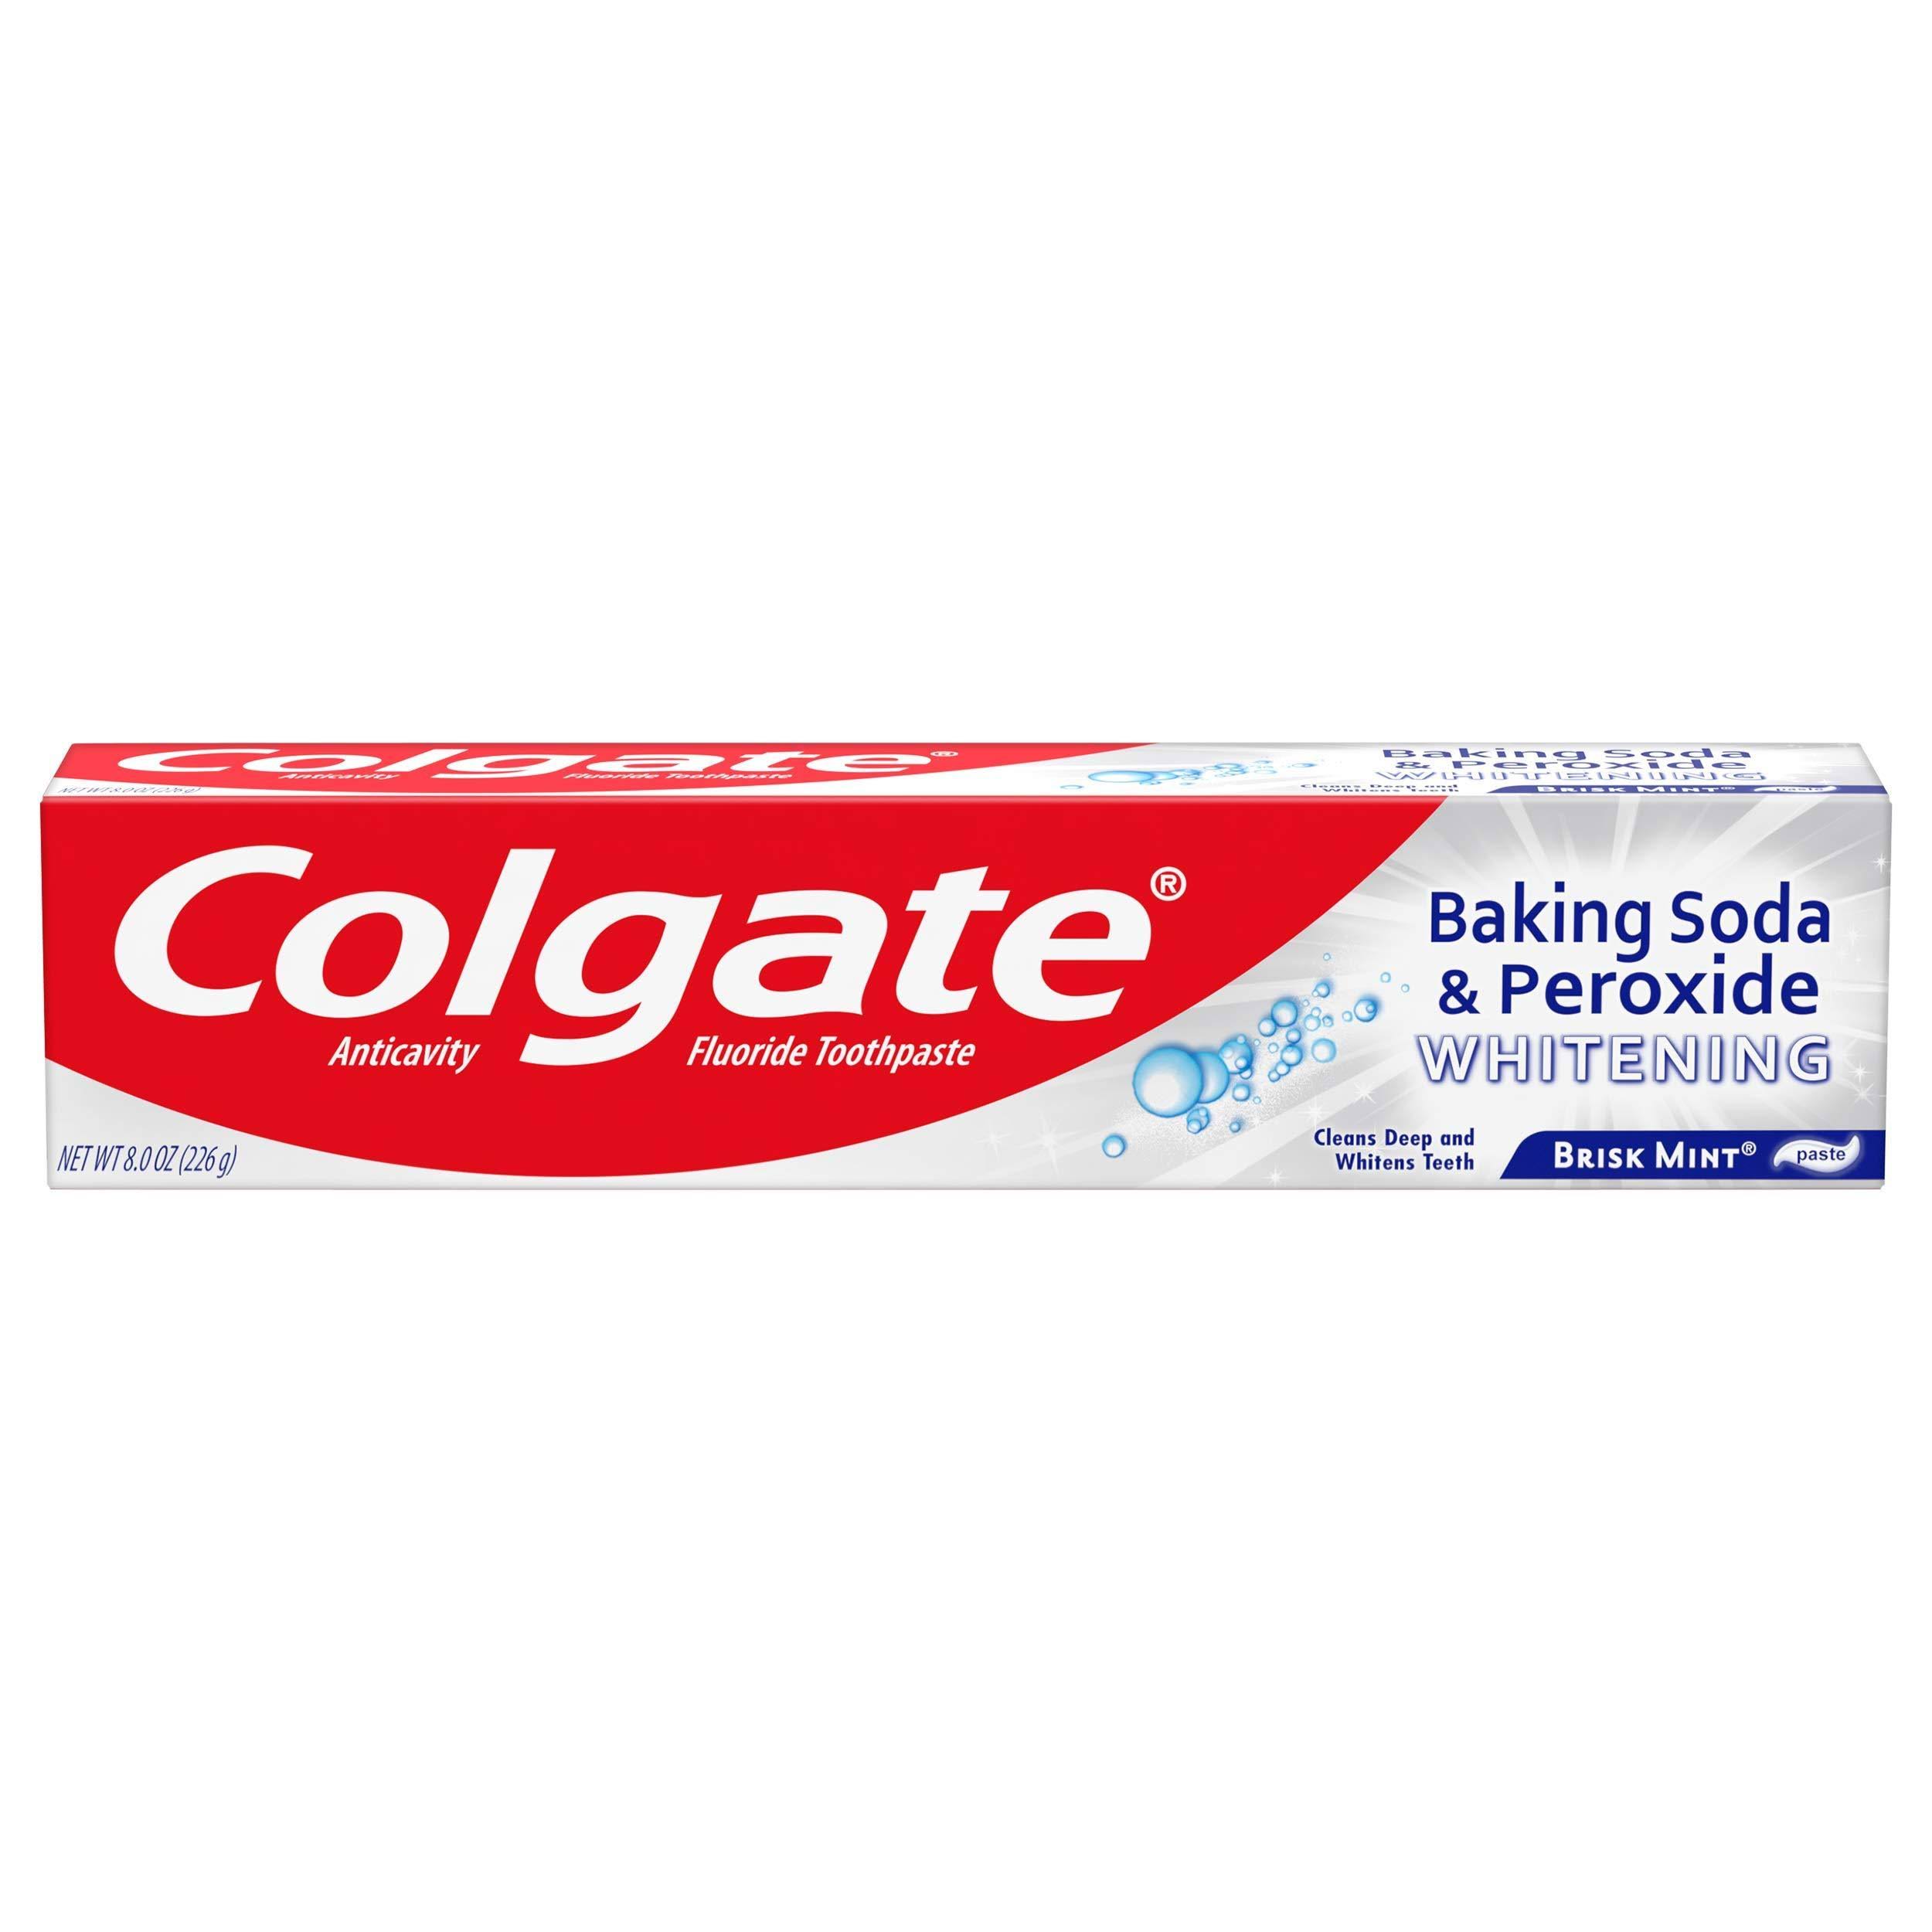 Colgate Baking Soda and Peroxide Whitening Bubbles Toothpaste - 8oz